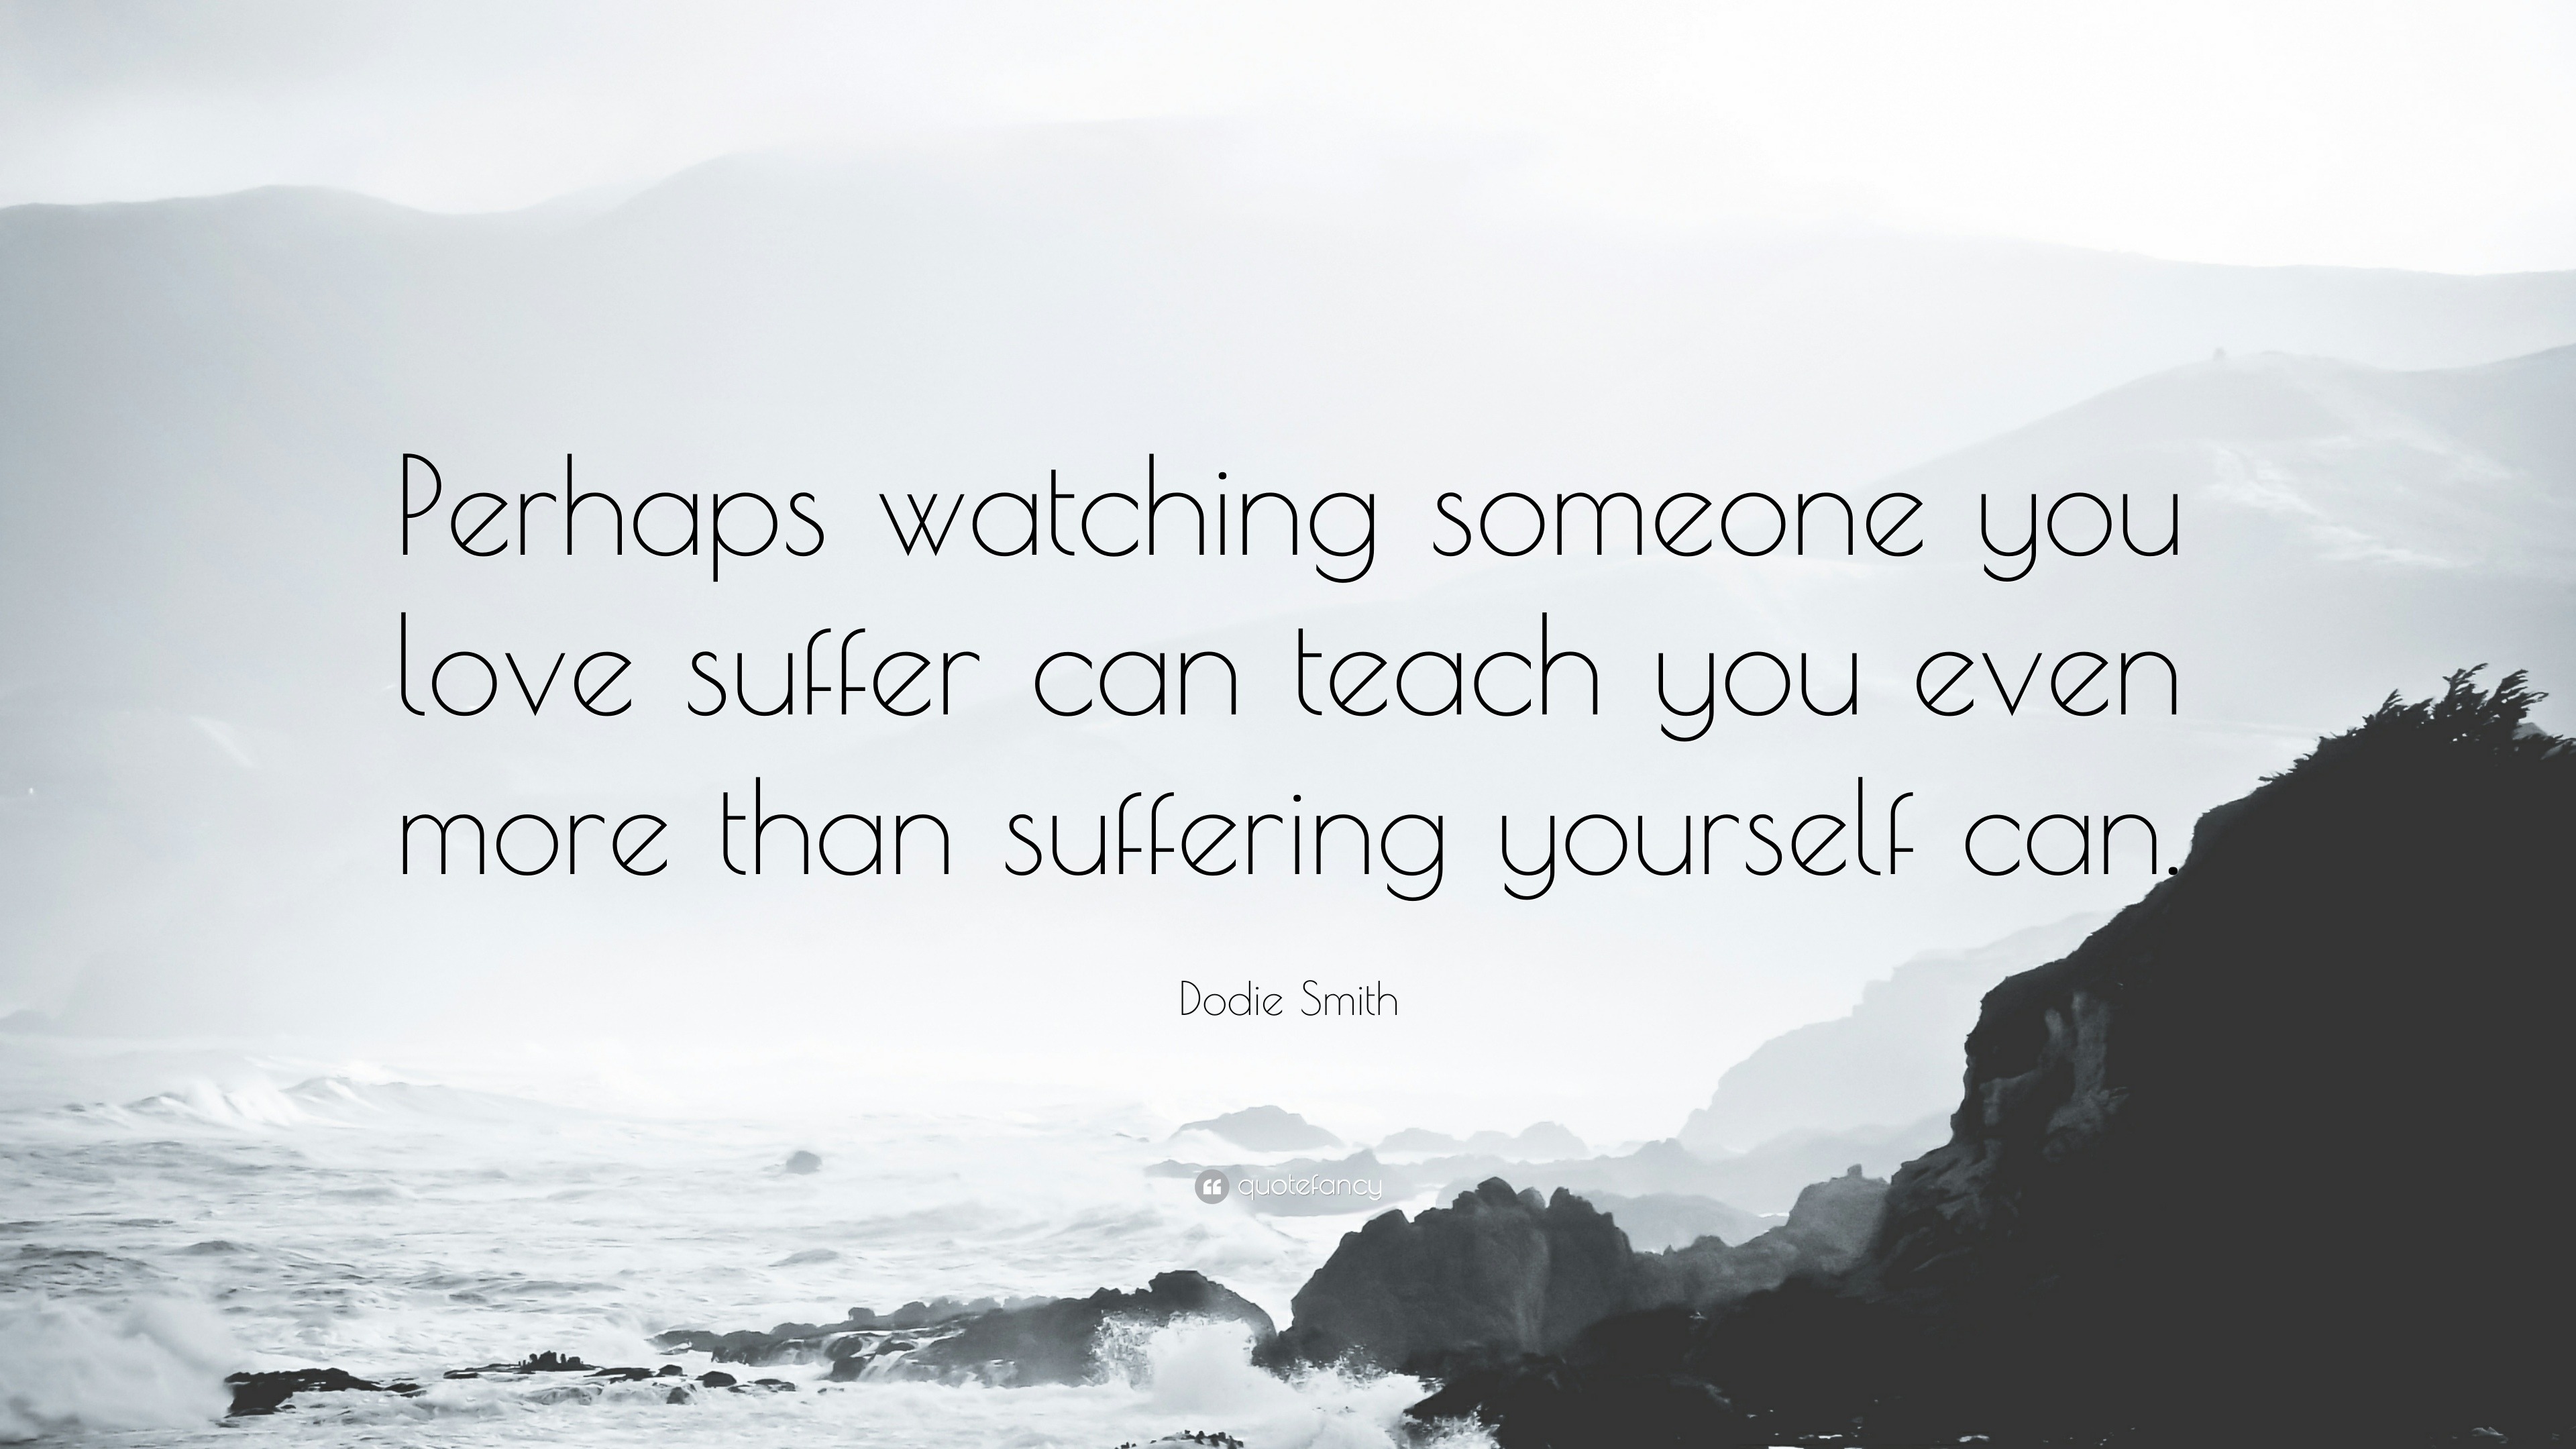 Do Smith Quote “Perhaps watching someone you love suffer can teach you even more